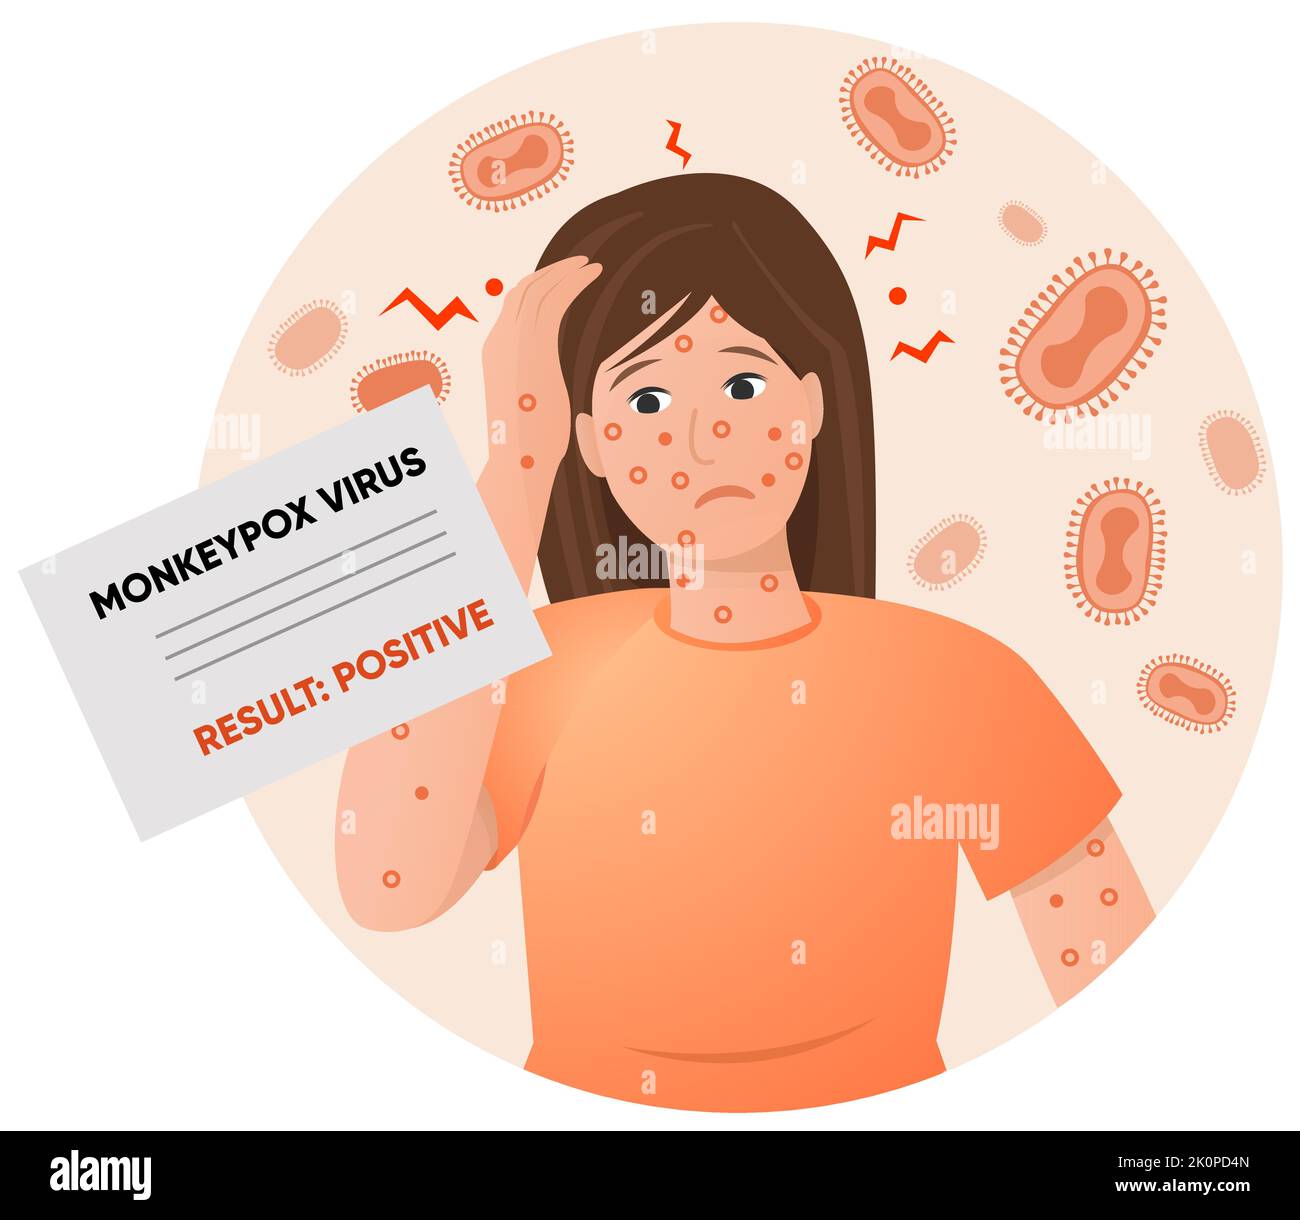 Sick woman with rash on her face and hands and monkeypox virus positive test result. Vector illustration Stock Vector